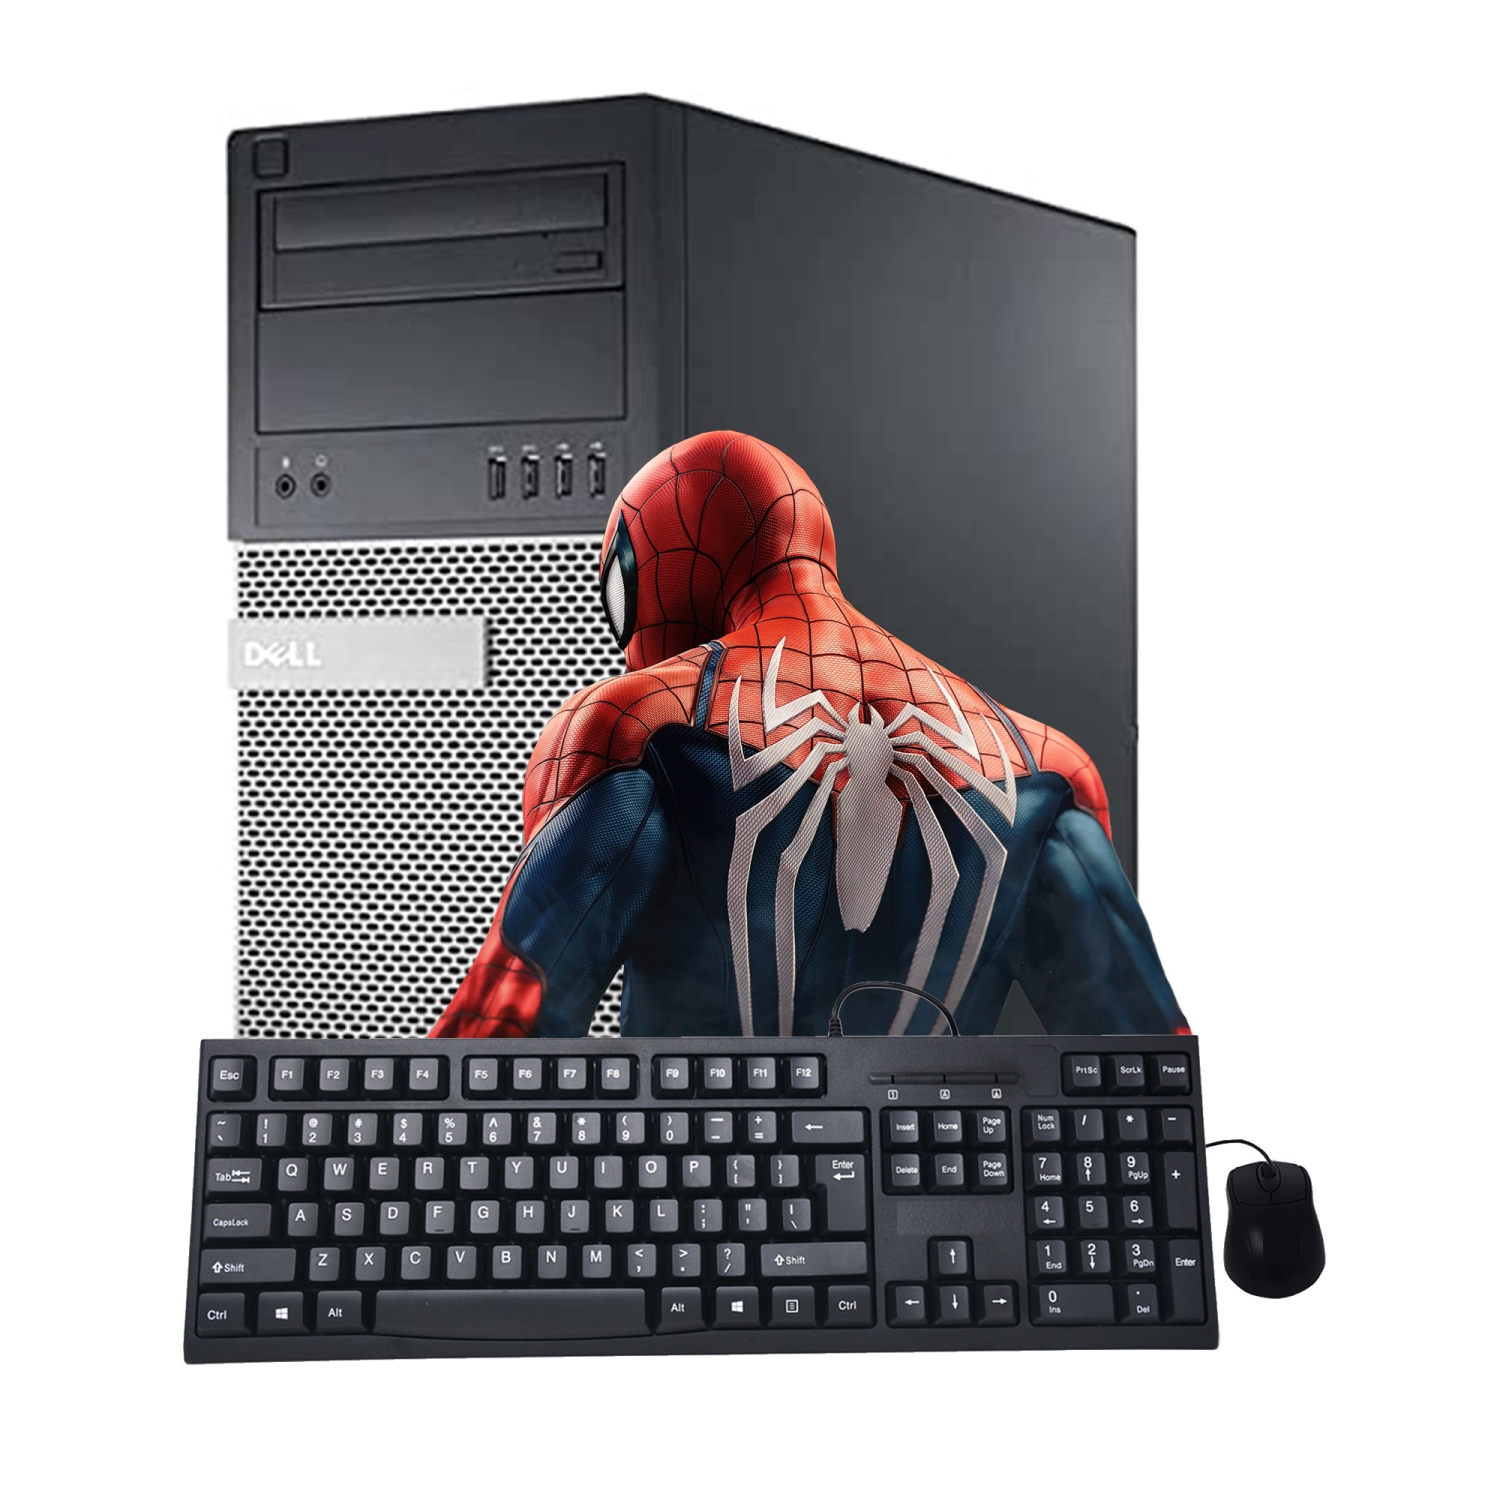 Gaming Desktop Computer Dell 7020 Tower Intel I7 4770 upto 3.90 Ghz 32GB DDR3 RAM New 1TB SSDNvidia GeForce GTX 1650 Keyboard & Mouse Wifi Win 10 Pro - Refurbished